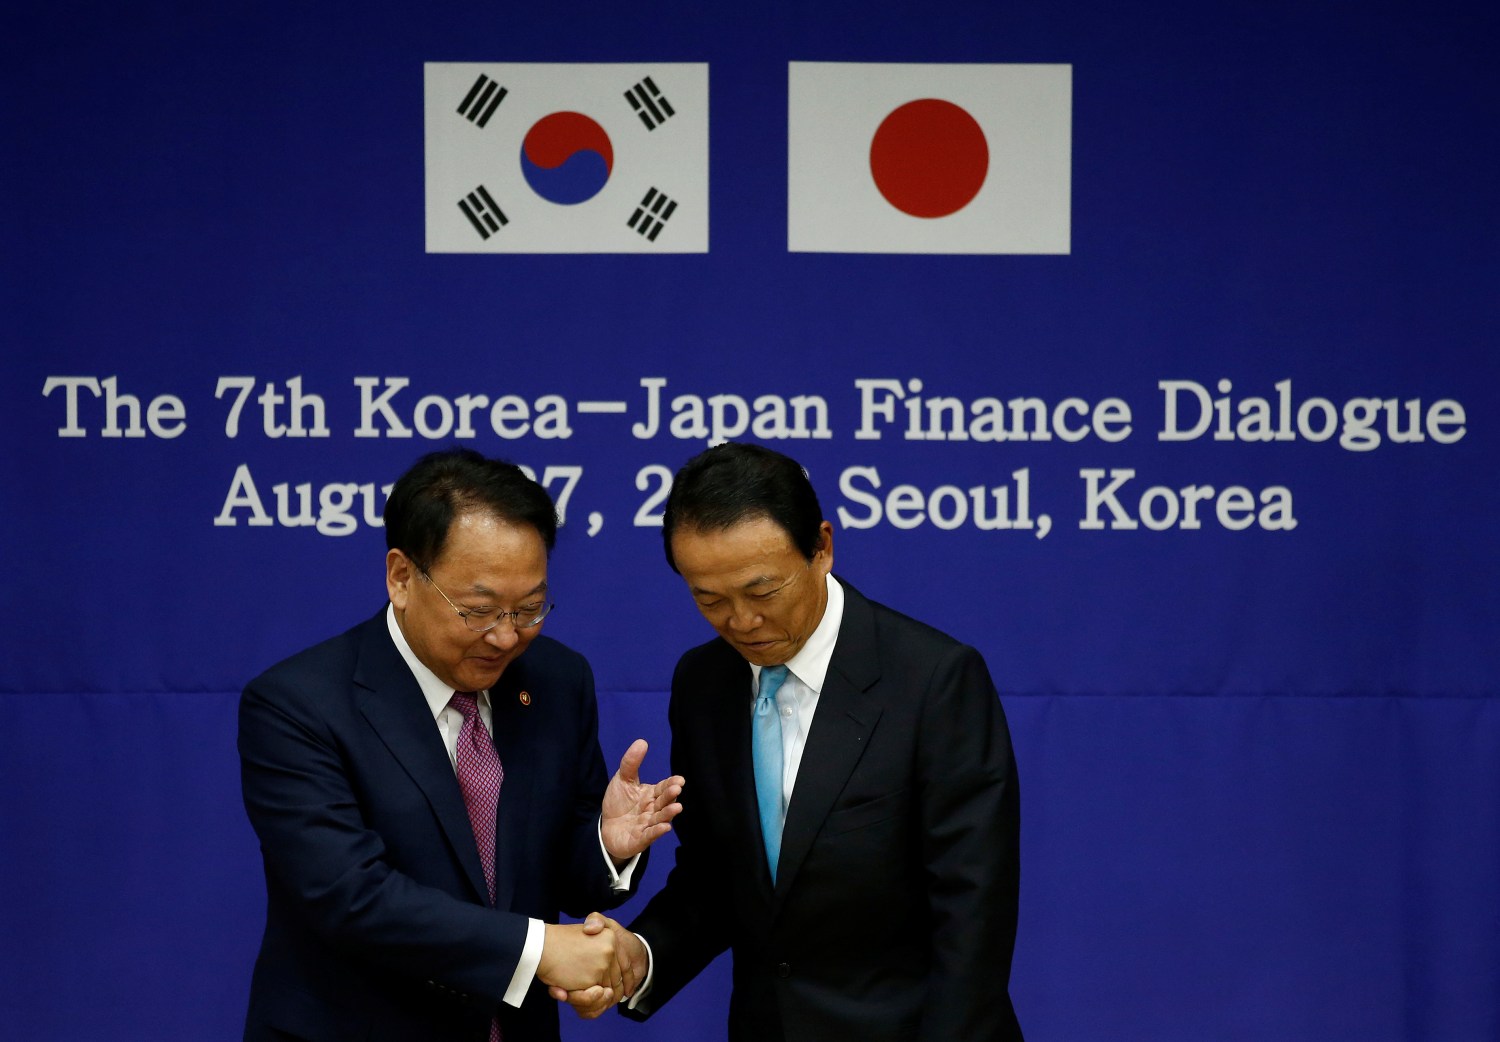 South Korean Finance Minister Yoo Il-ho shakes hands with his Japanese counterpart Taro Aso during the 7th Korea-Japan Finance Dialogue at the Government Complex in Seoul